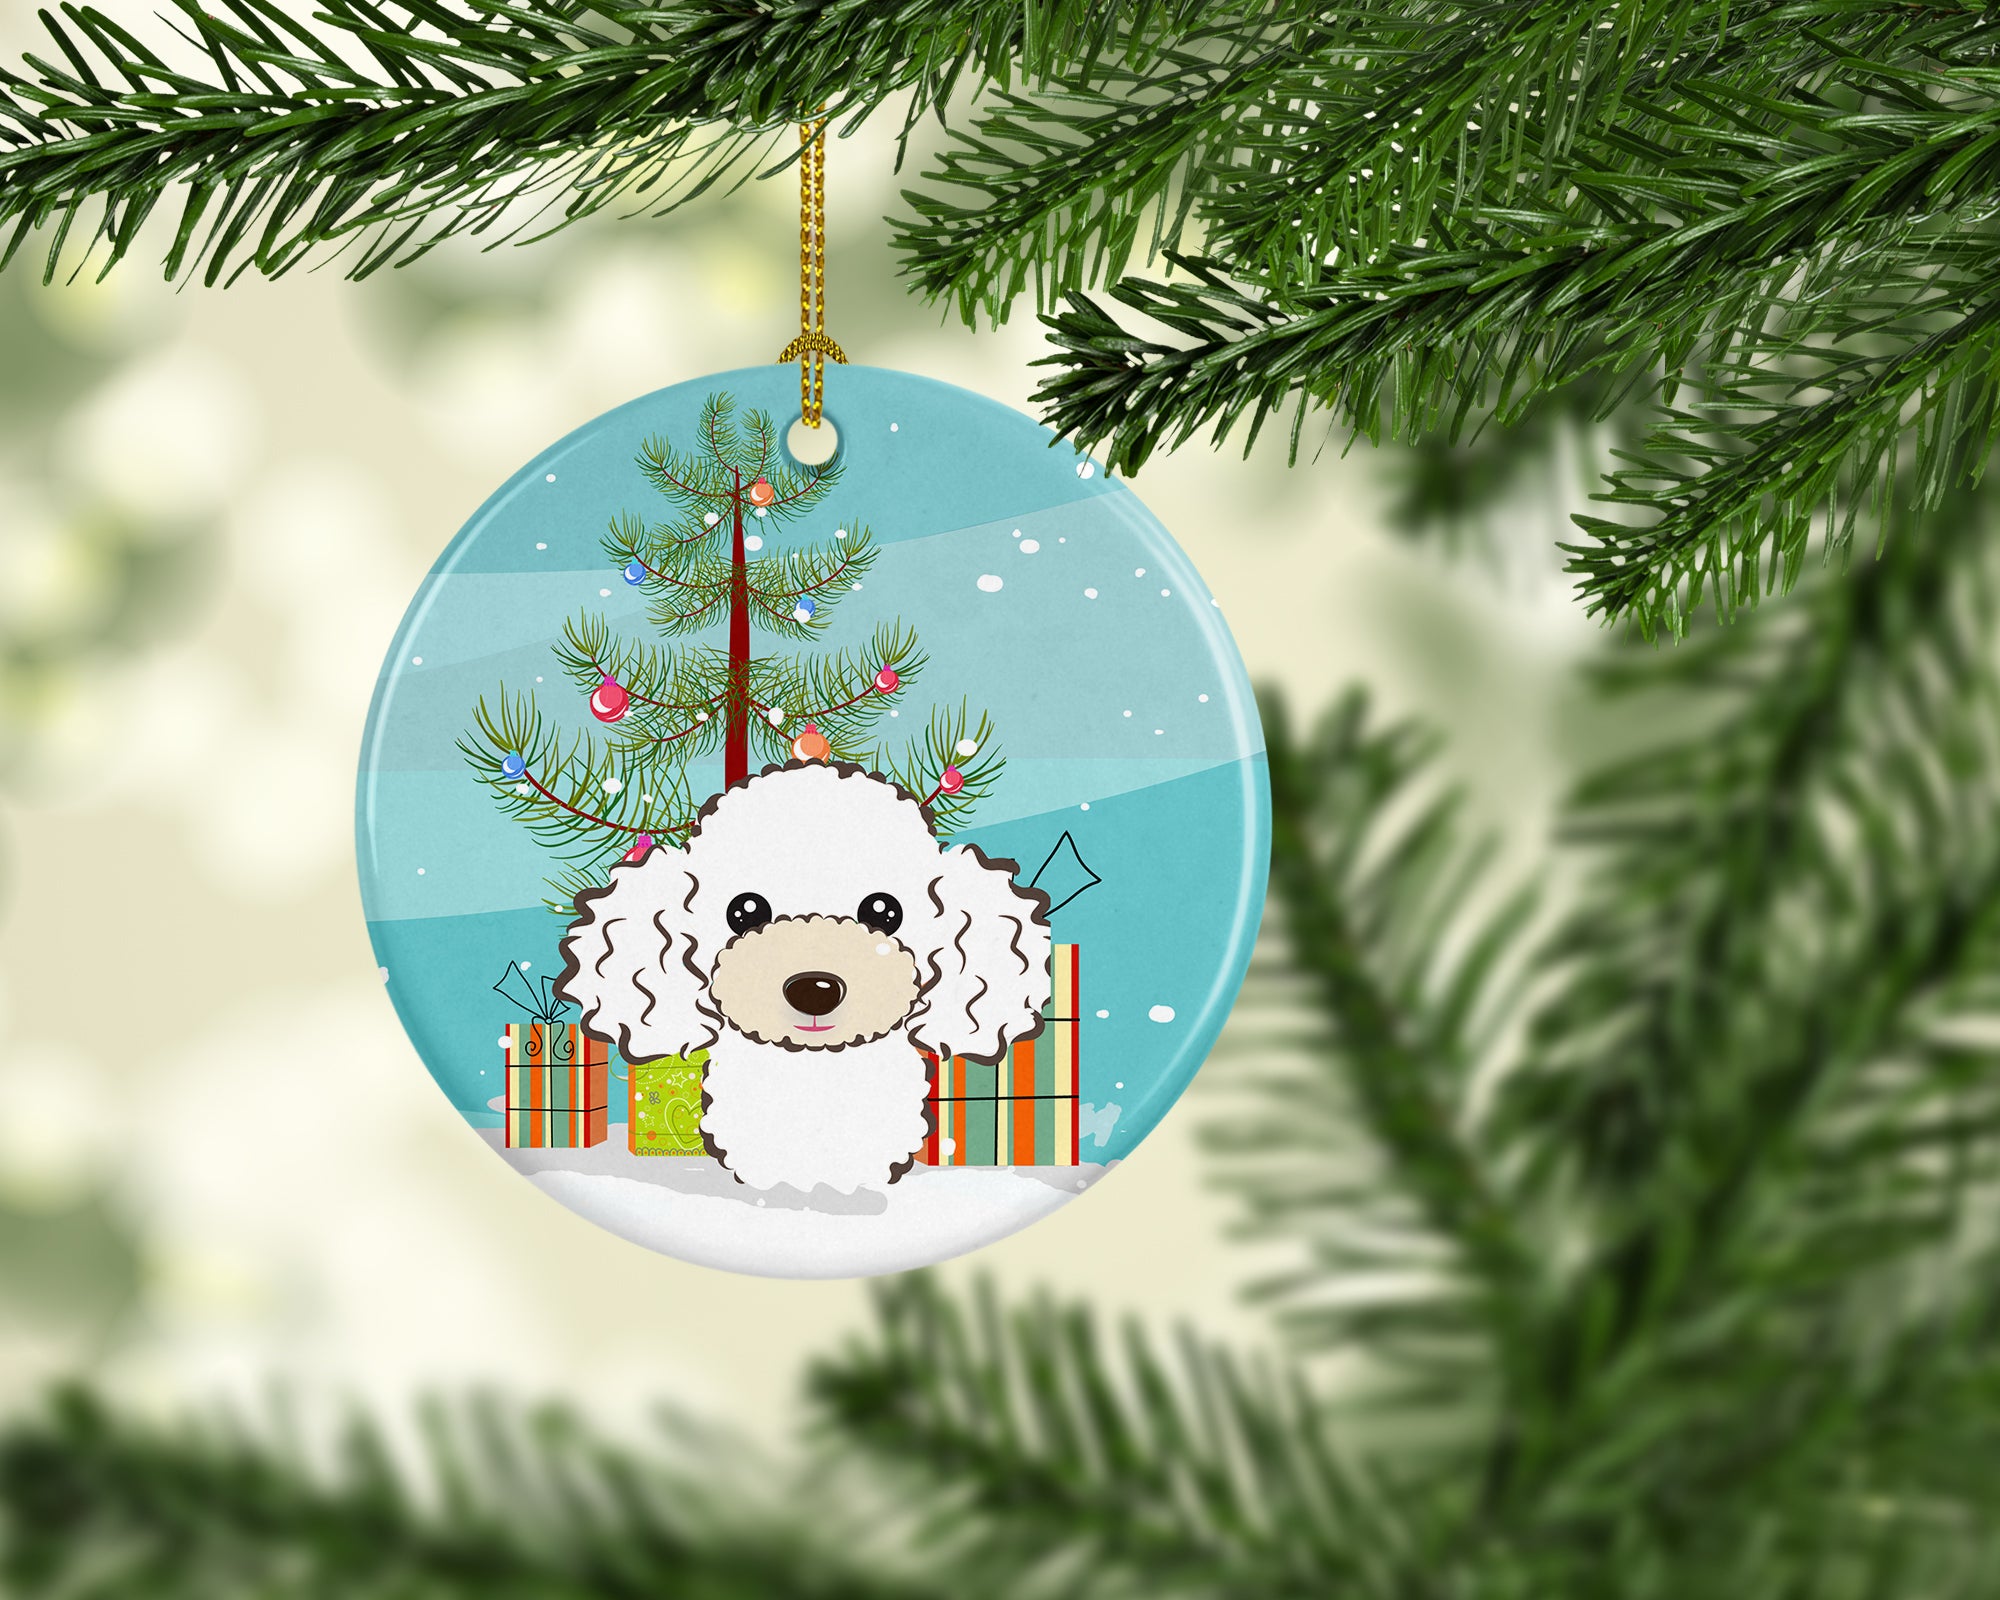 Christmas Tree and White Poodle Ceramic Ornament BB1629CO1 - the-store.com